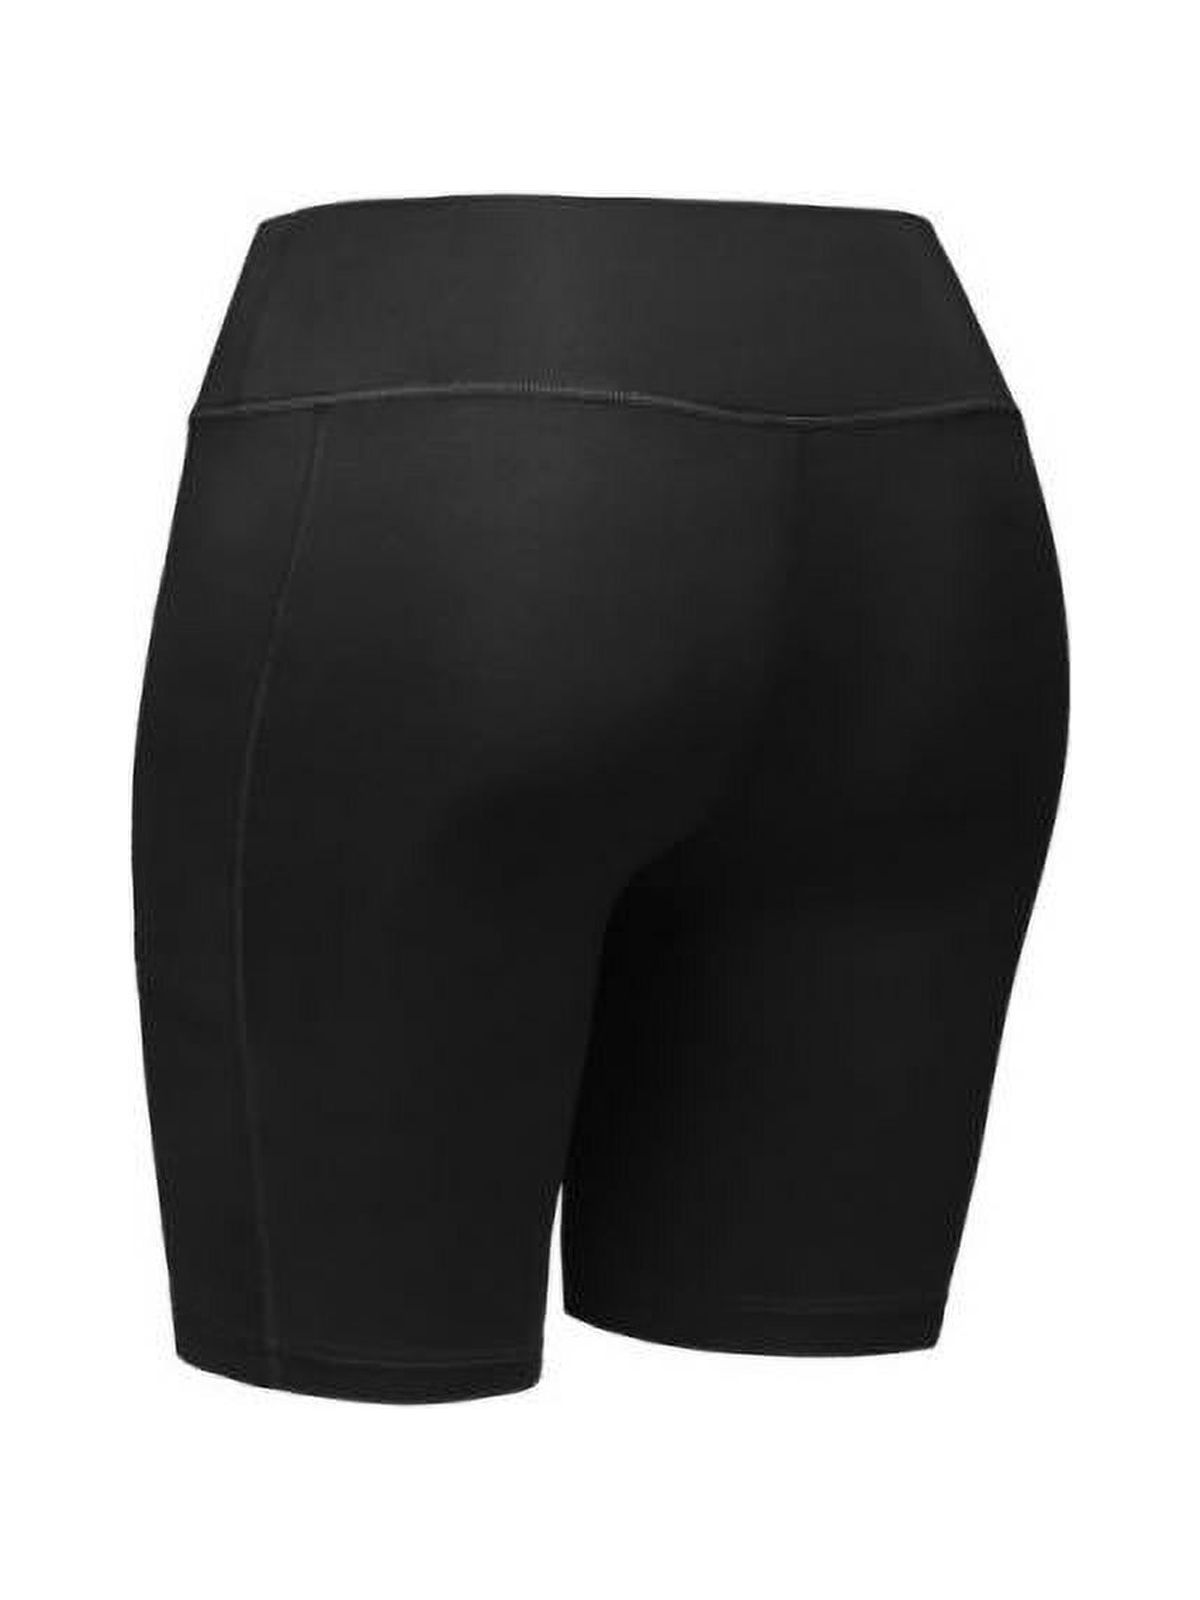 Fymall Women Sports Fitness Compression Shorts For Running Yoga - image 2 of 2